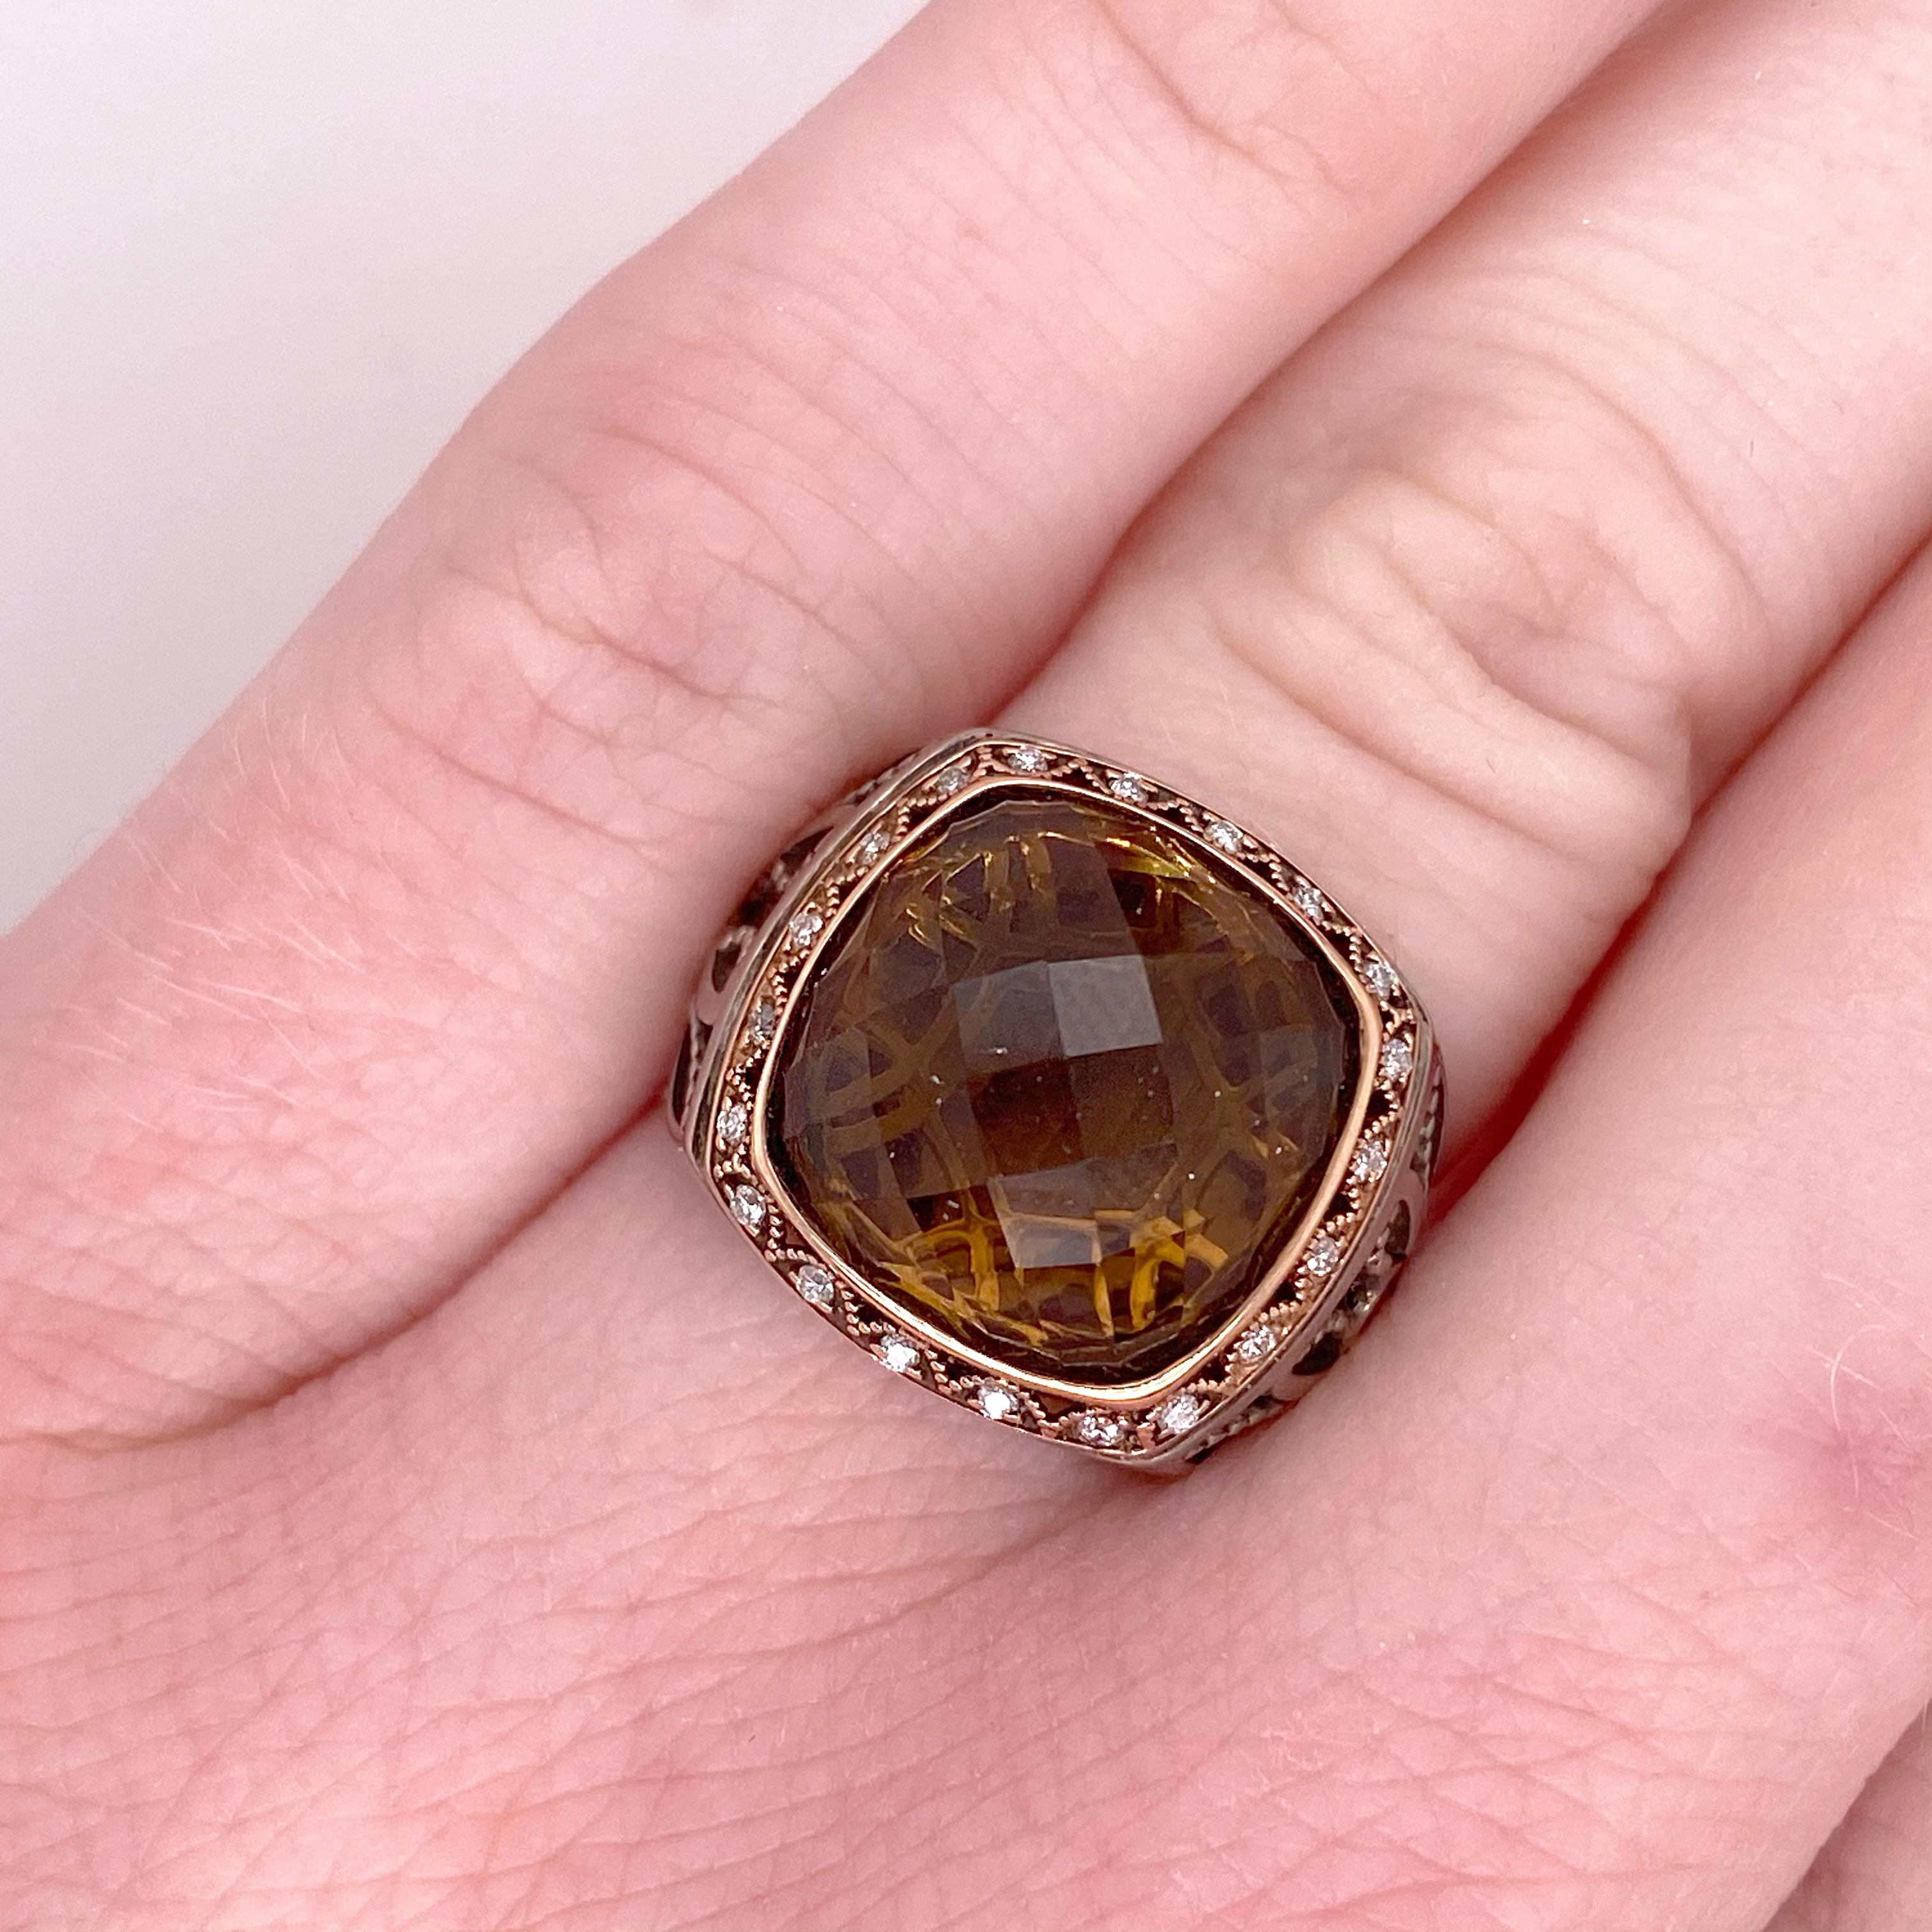 Authentic Tacori Genuine Cognac Quartz Ring-SR104.  Size 6 but is sizable.  It has the beautiful detail of the crescents going around the cushion shaped, genuine gemstone.  The diamond bezel is crafted in pure 18 karat rose gold which sets off the